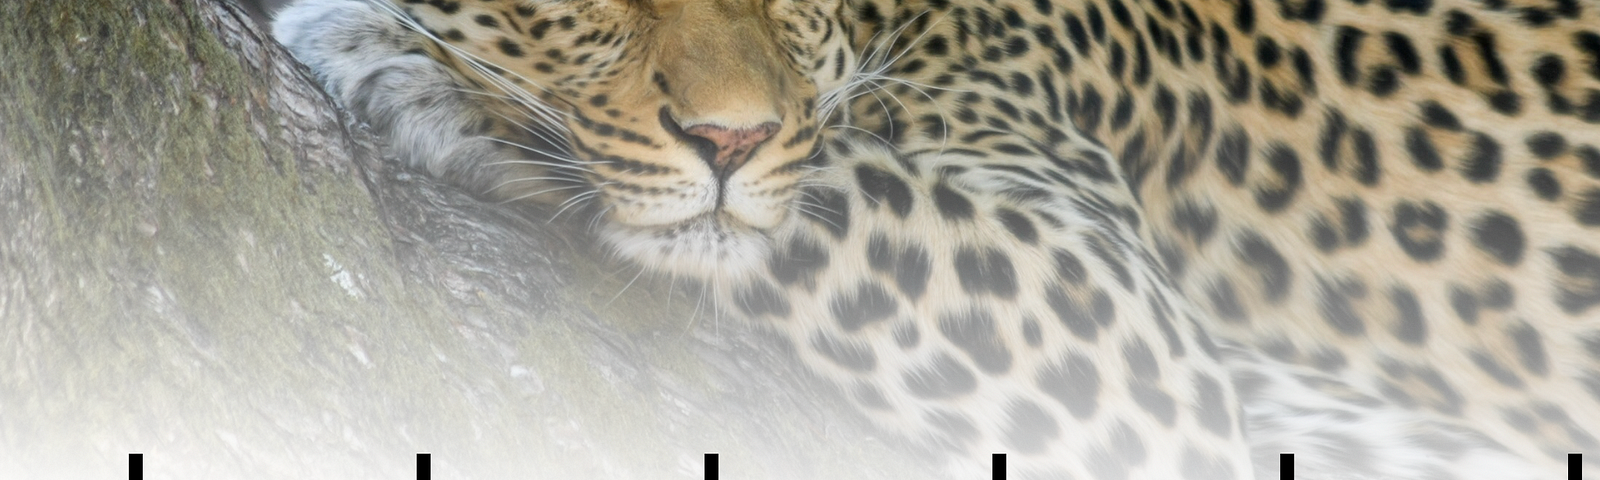 Leopard in a tree, with typographical marks in a repeating pattern at the bottom of the image